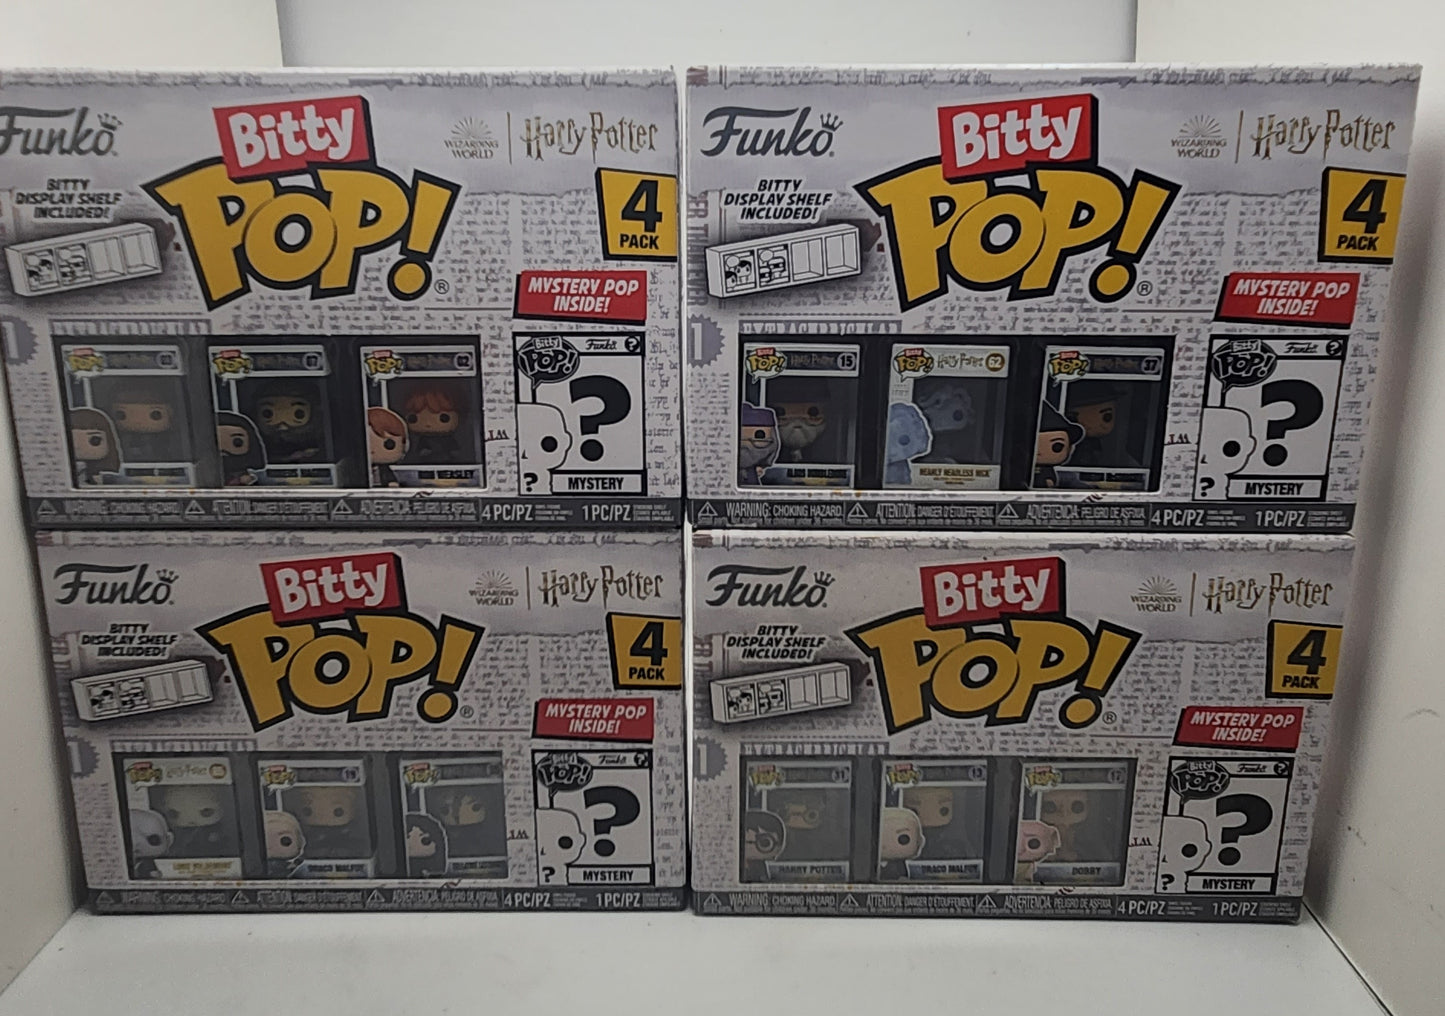 Bitty Pop! Harry Potter 4-Pack - Series 1-4 - Box Condition 10/10 - NEW / UNOPENED